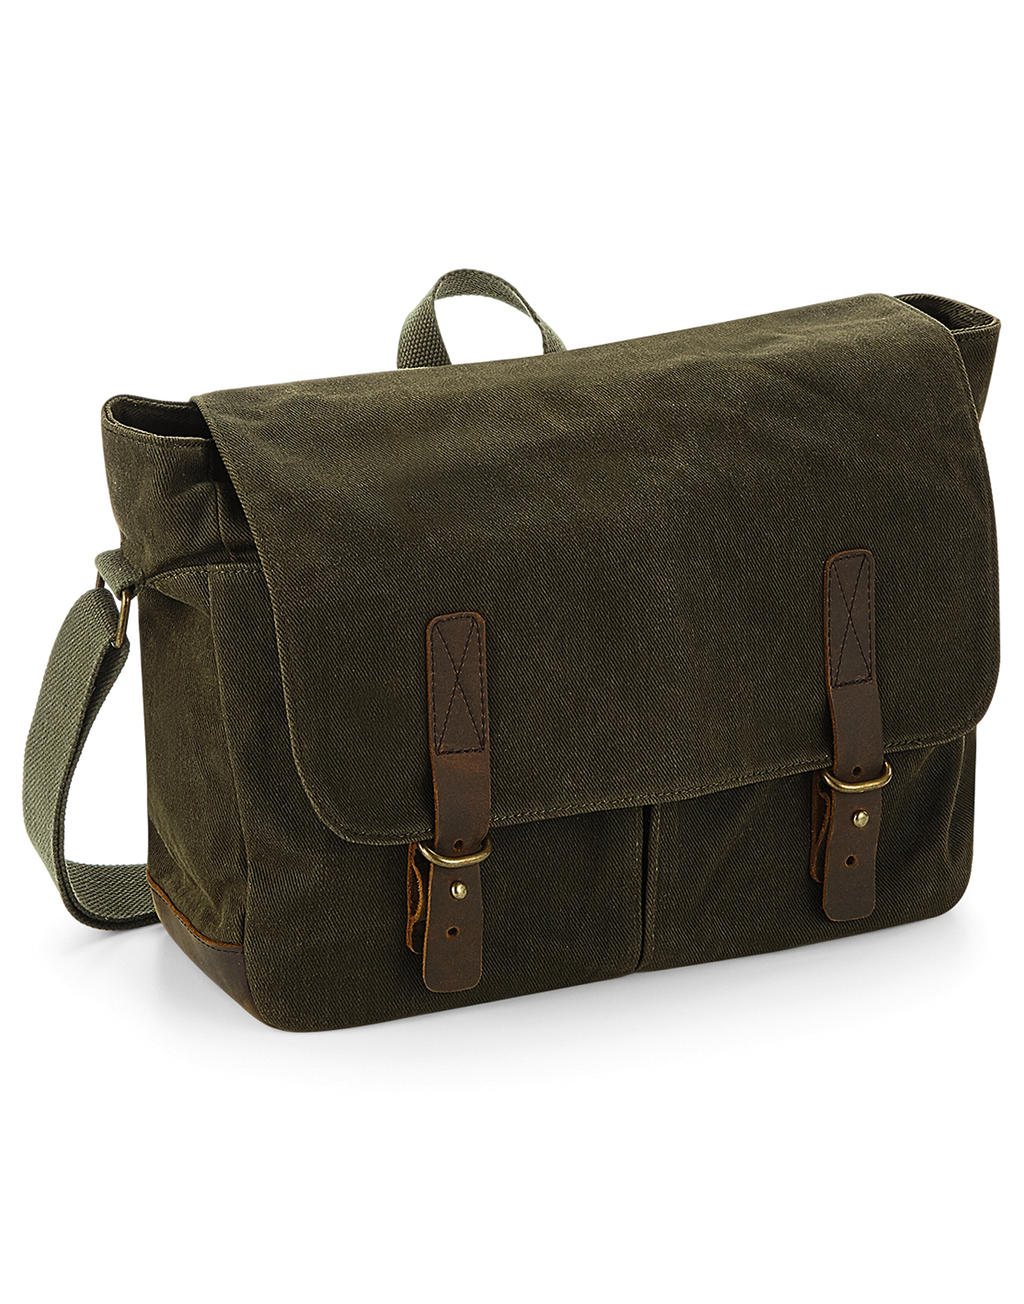  Heritage Waxed Canvas Messenger in Farbe Black